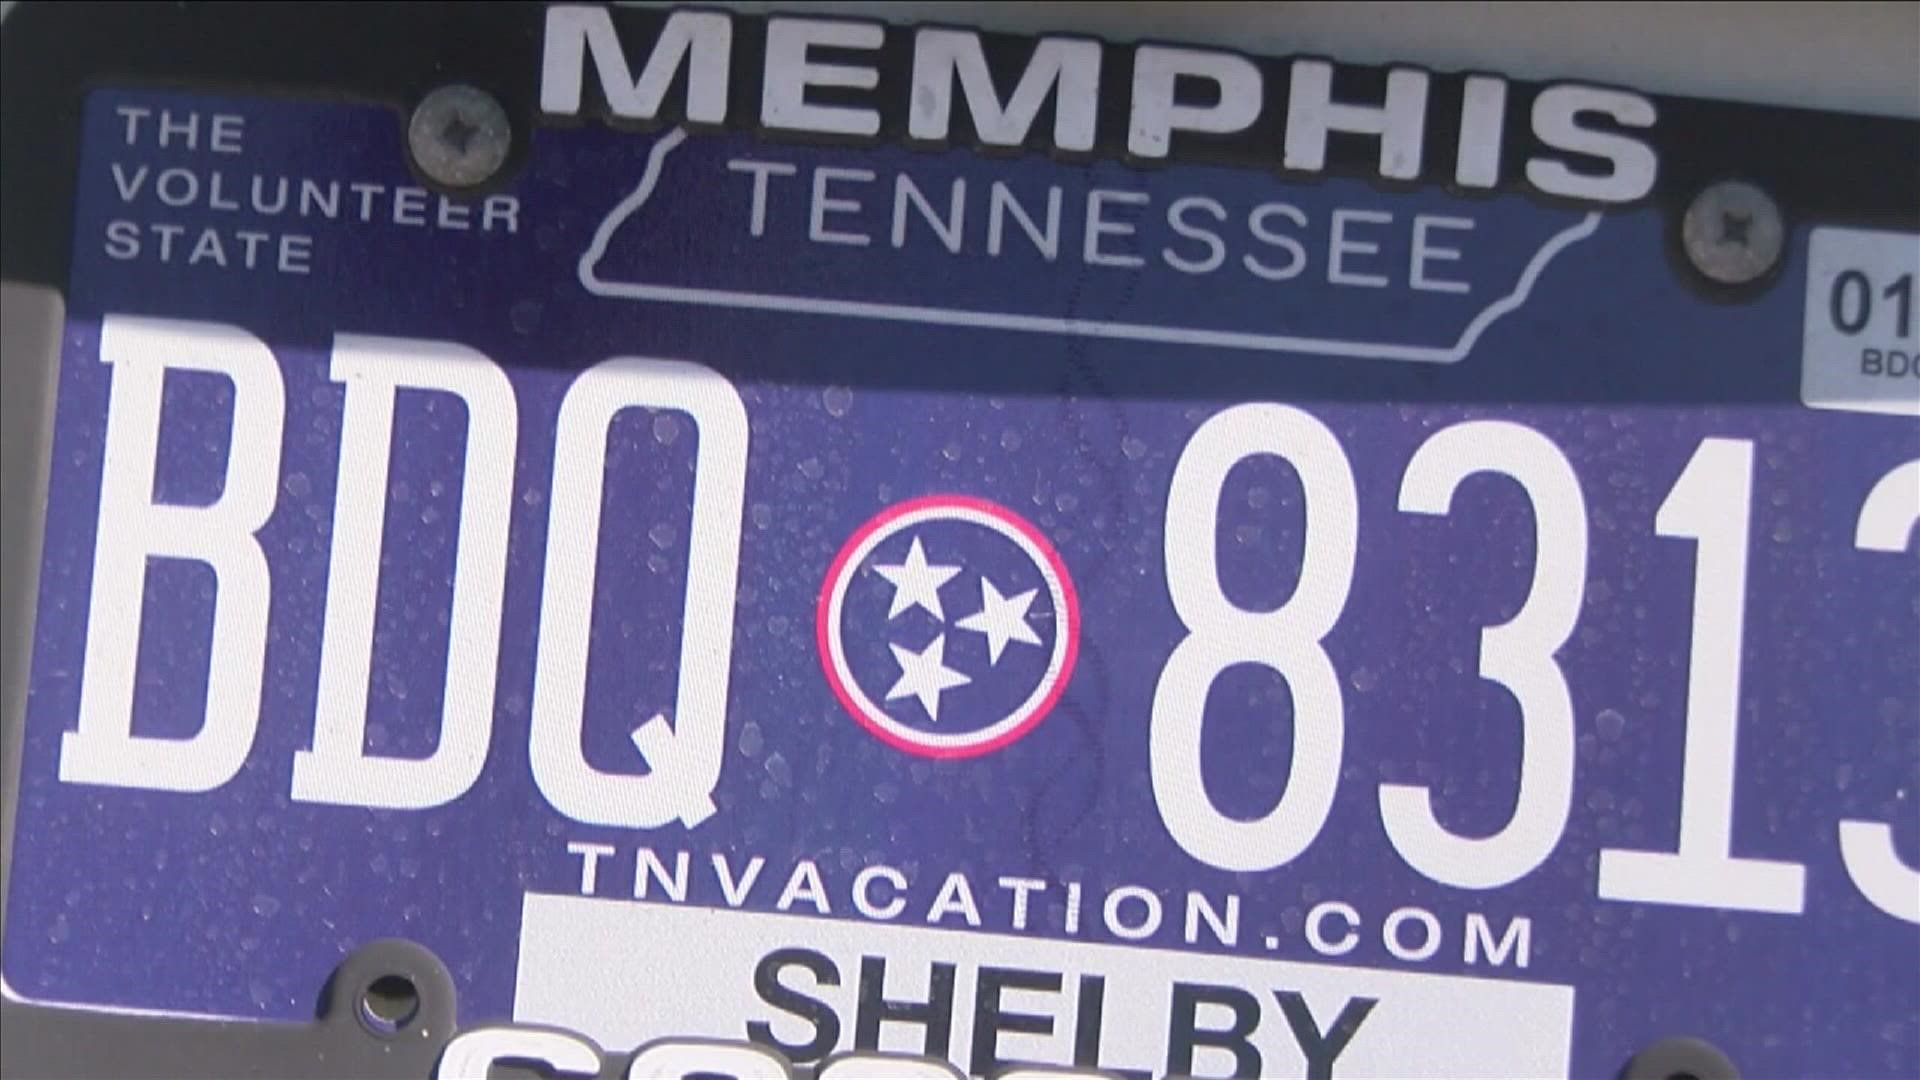 No new plates have been mailed out since mid-May and Shelby County Clerk Wanda Halbert said she doesn't have the staff or funds to send them.